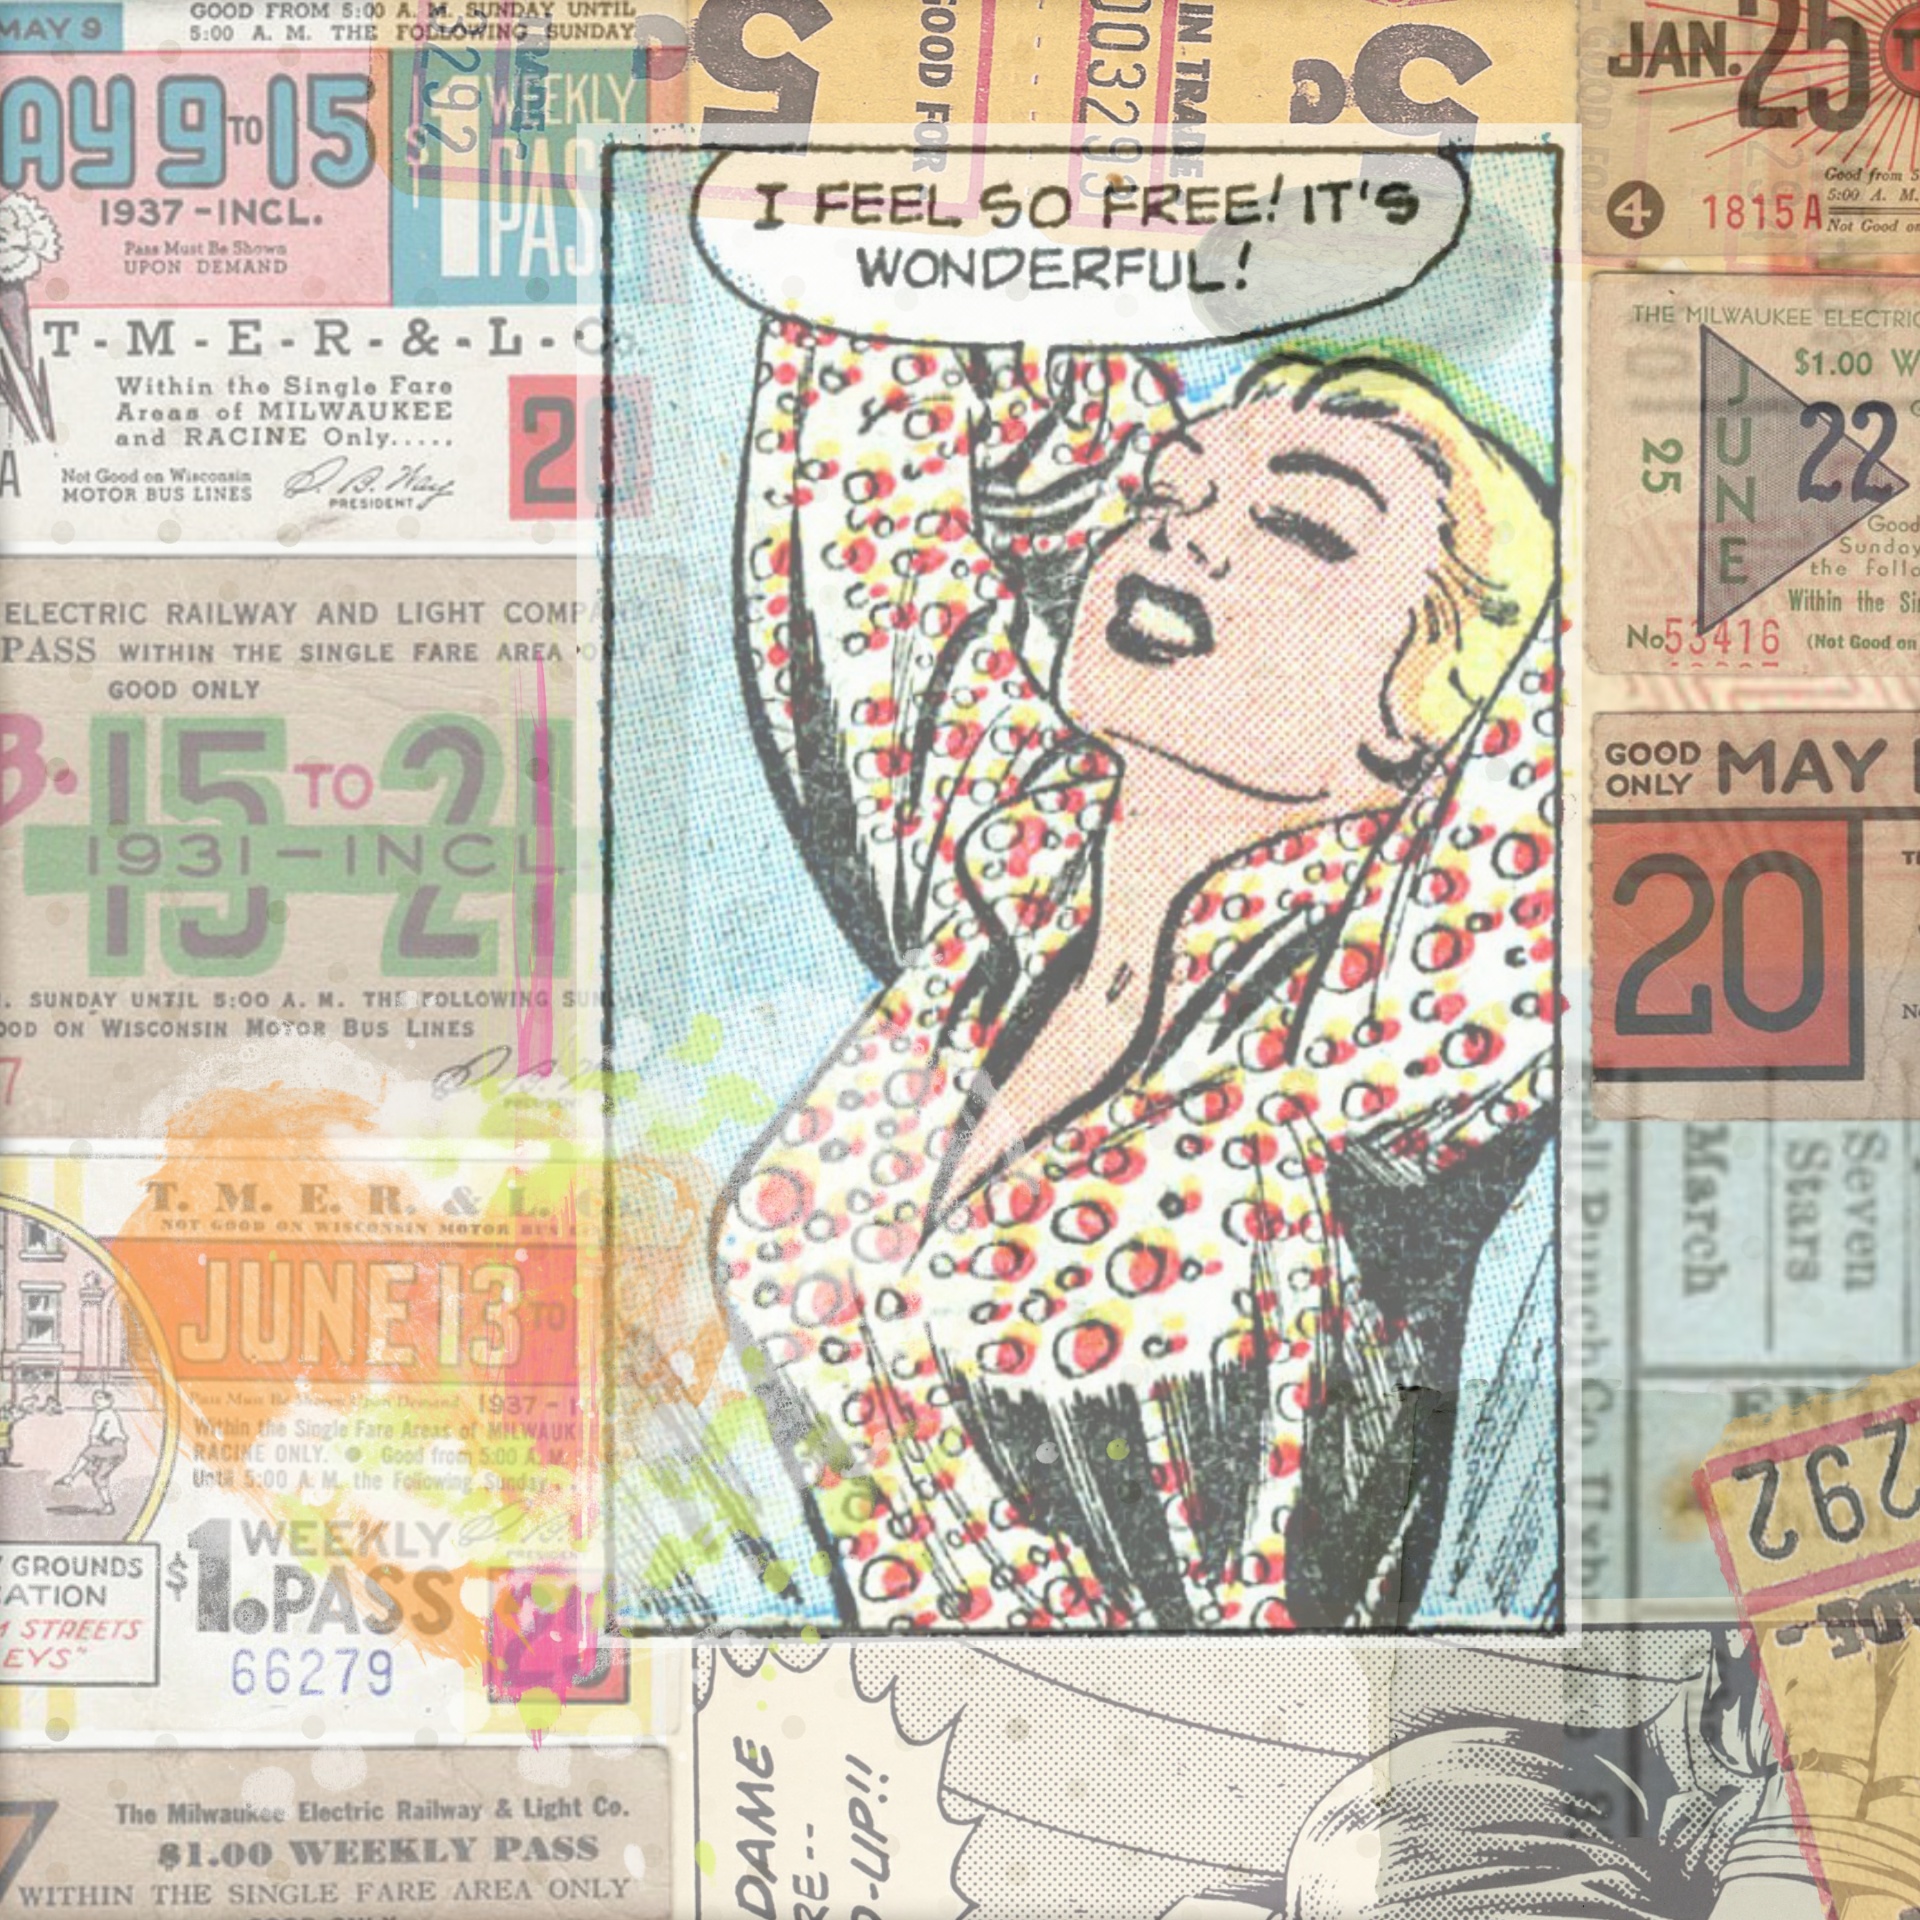 Retro Beautiful Pin-up Lady Digital Background Collage Sexy Girl - A fun and modern rework of Vintage Retro Art. Perfect for art projects, decoupage, scrapbooking and more!